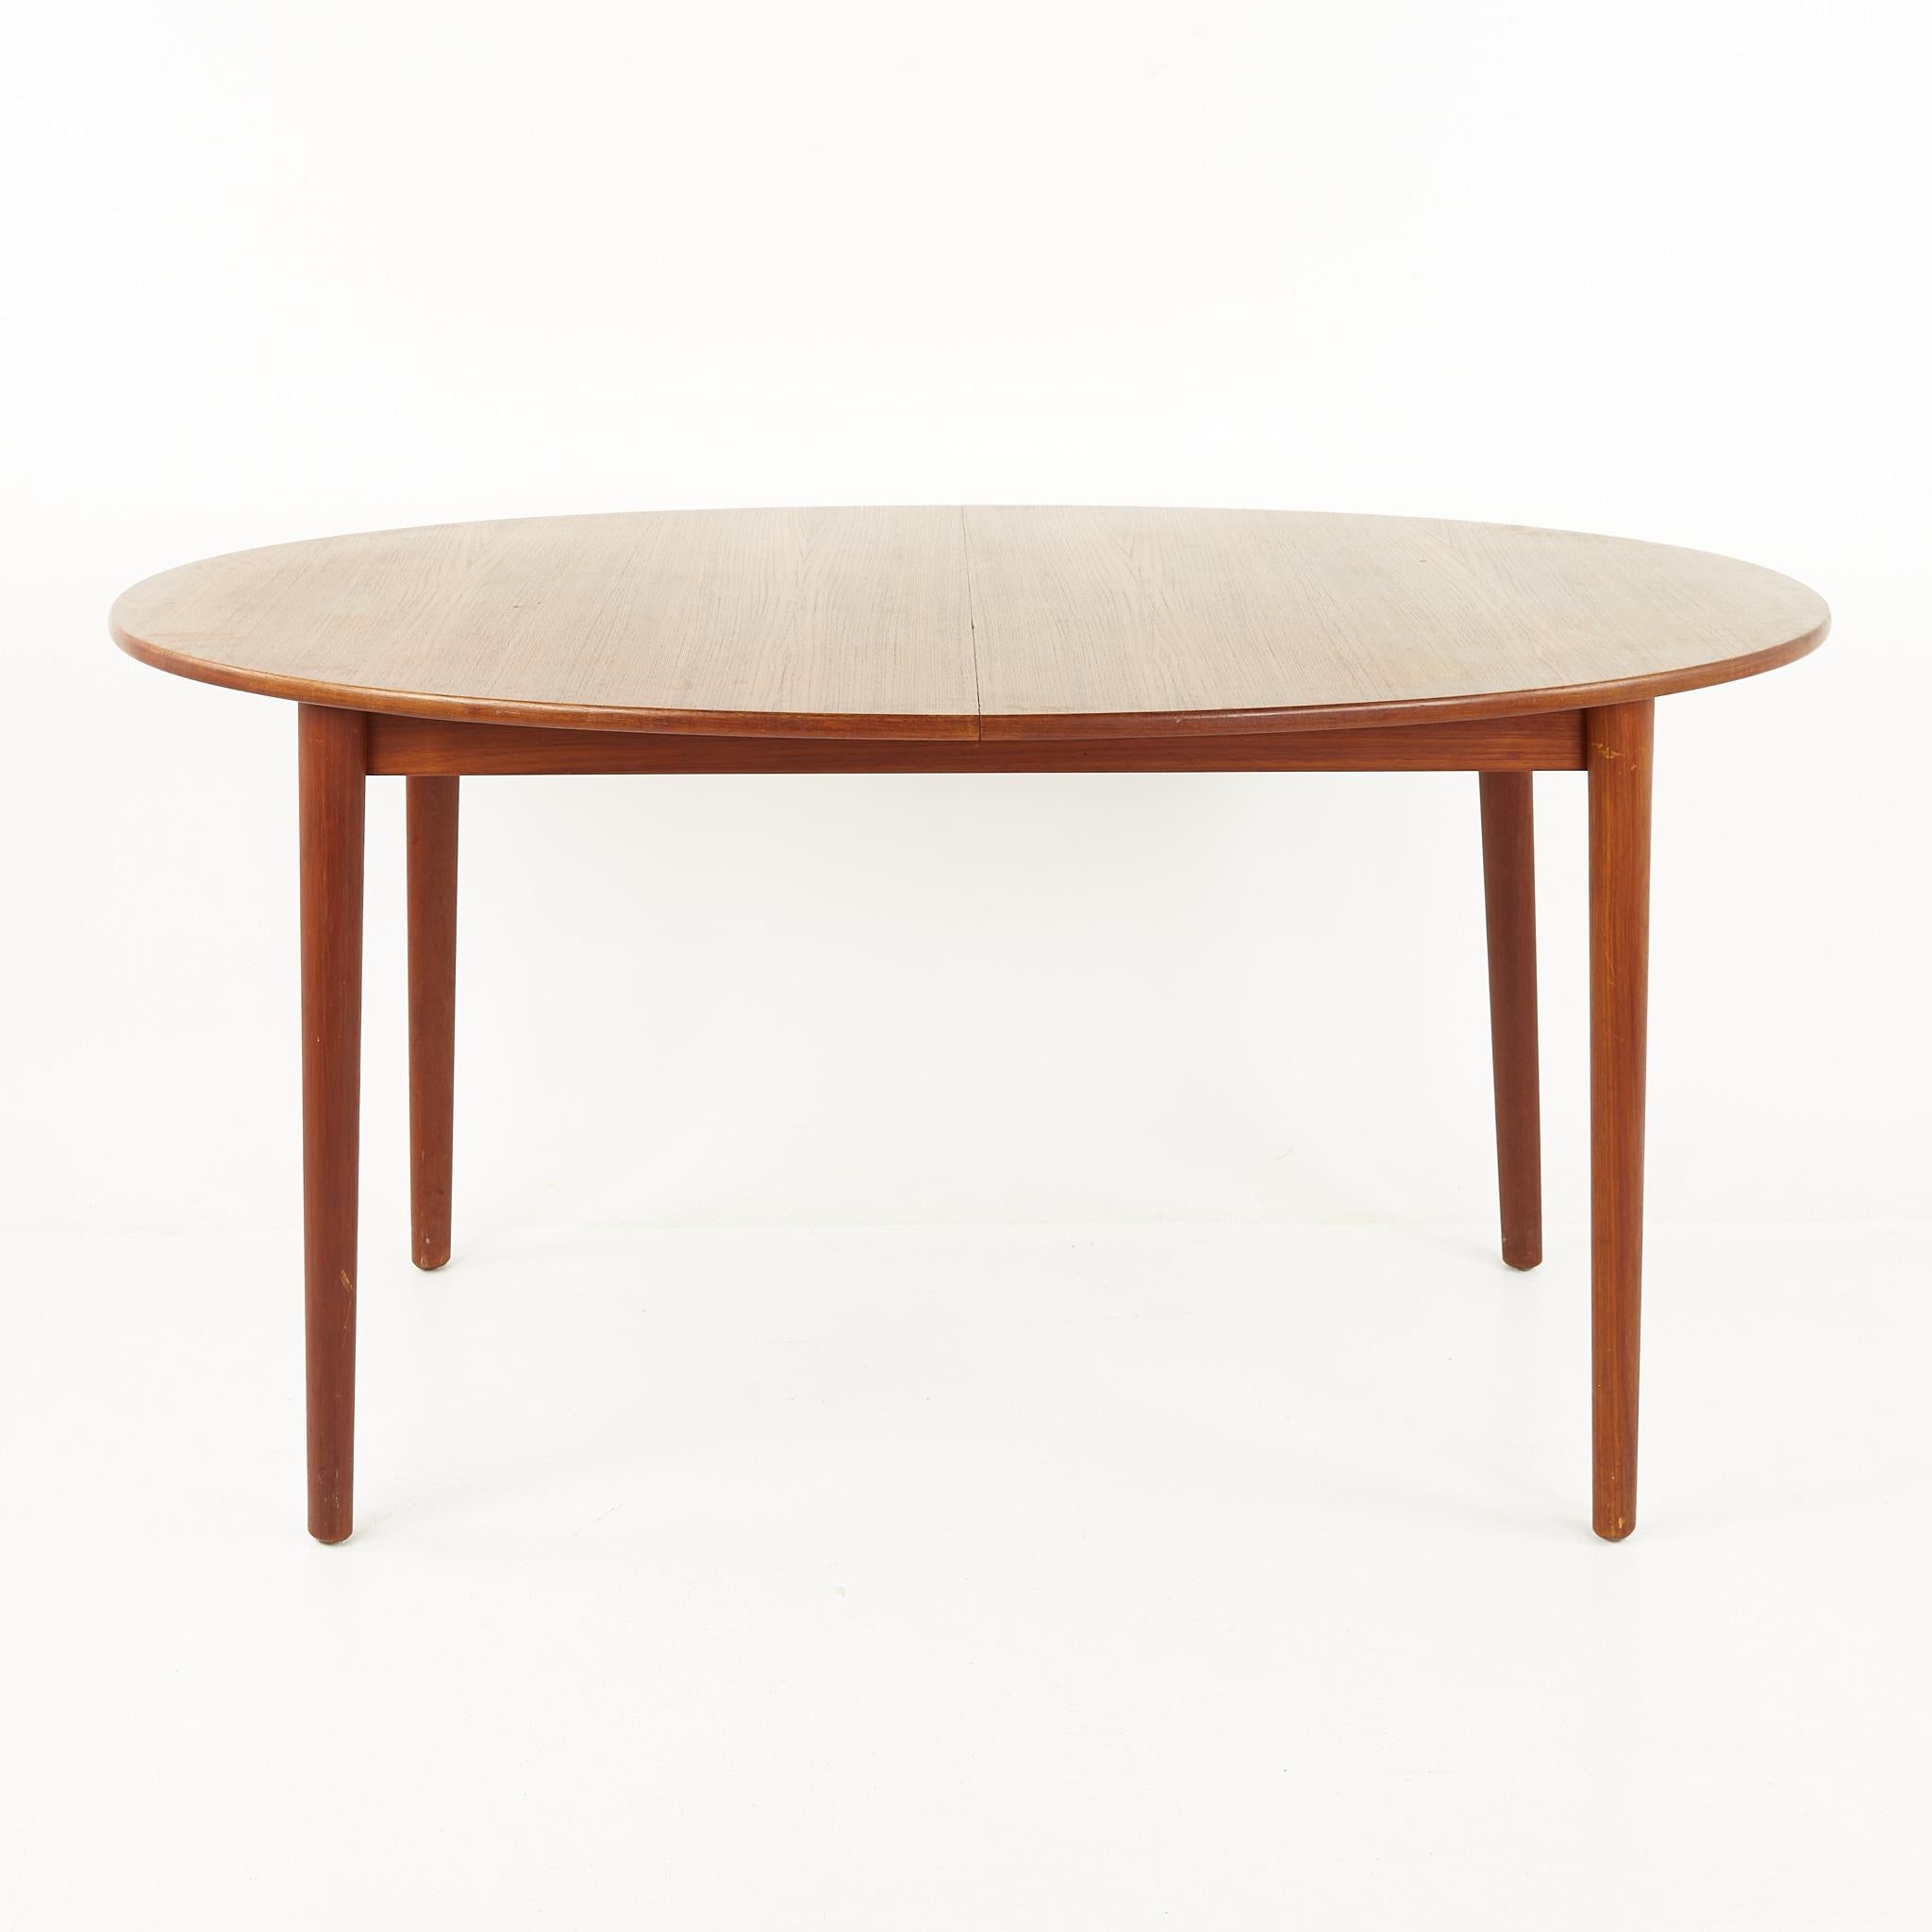 Peter Hvidt mid century dining table with 2 leaves

This table measures: 60 wide x 40 deep x 29 inches high, each of the 2 leaves are 12 inches wide, making a maximum table width of 84 inches

All pieces of furniture can be had in what we call